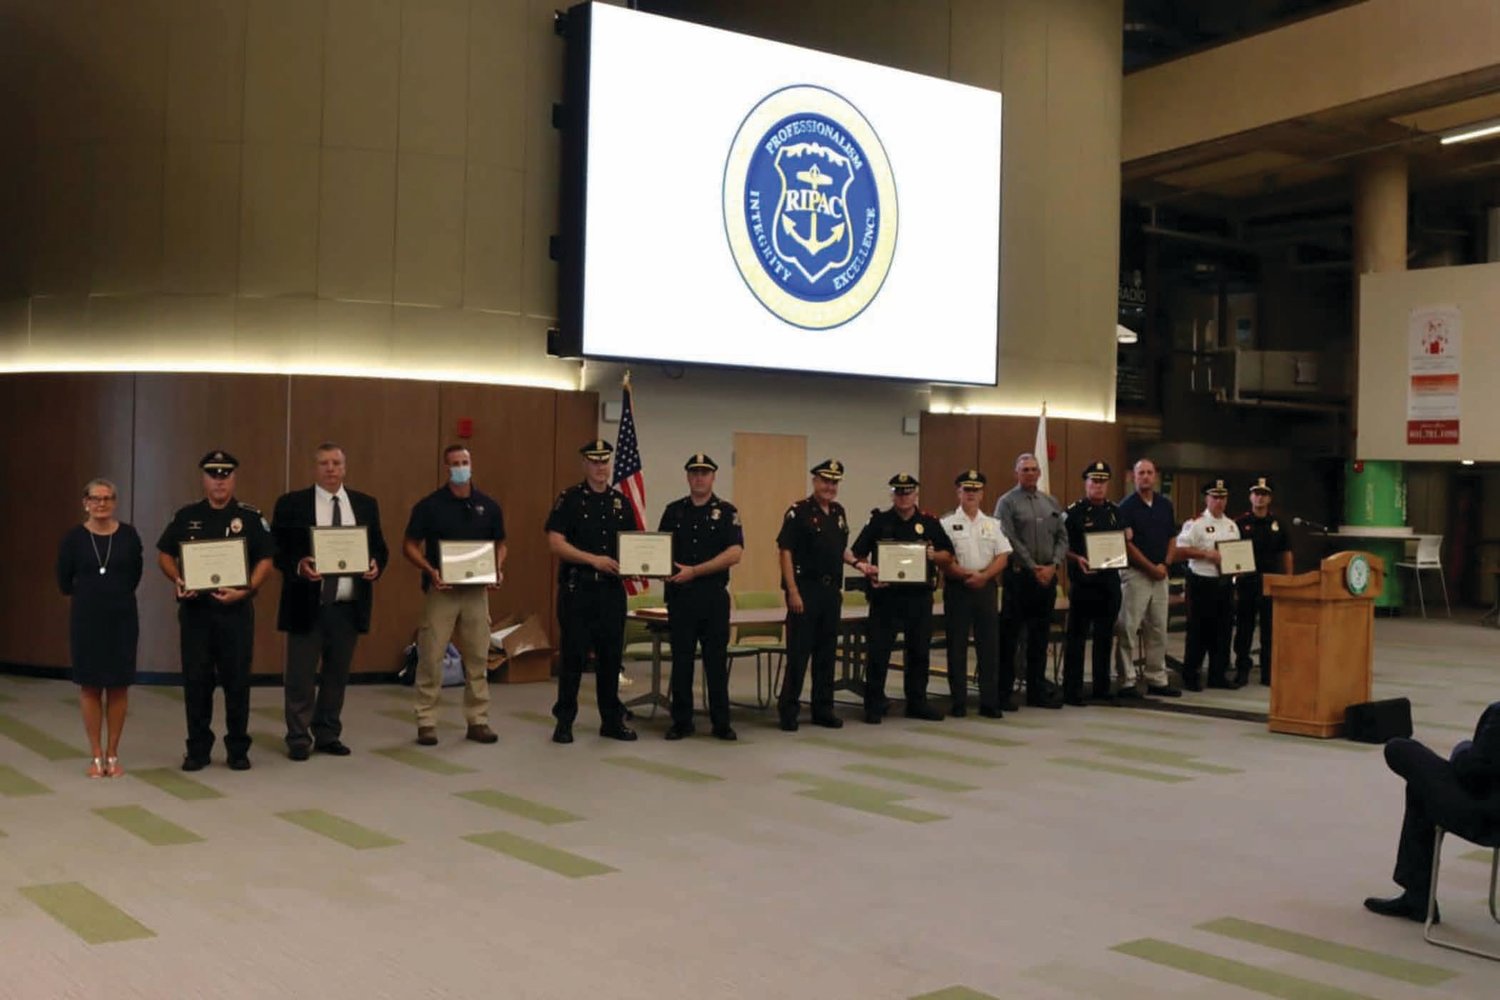 NIGHT OF RECOGNITION:The Rhode Island Police Accreditation Commission honored 14 police departments for achieving accreditation or reaccreditation status during the past year.